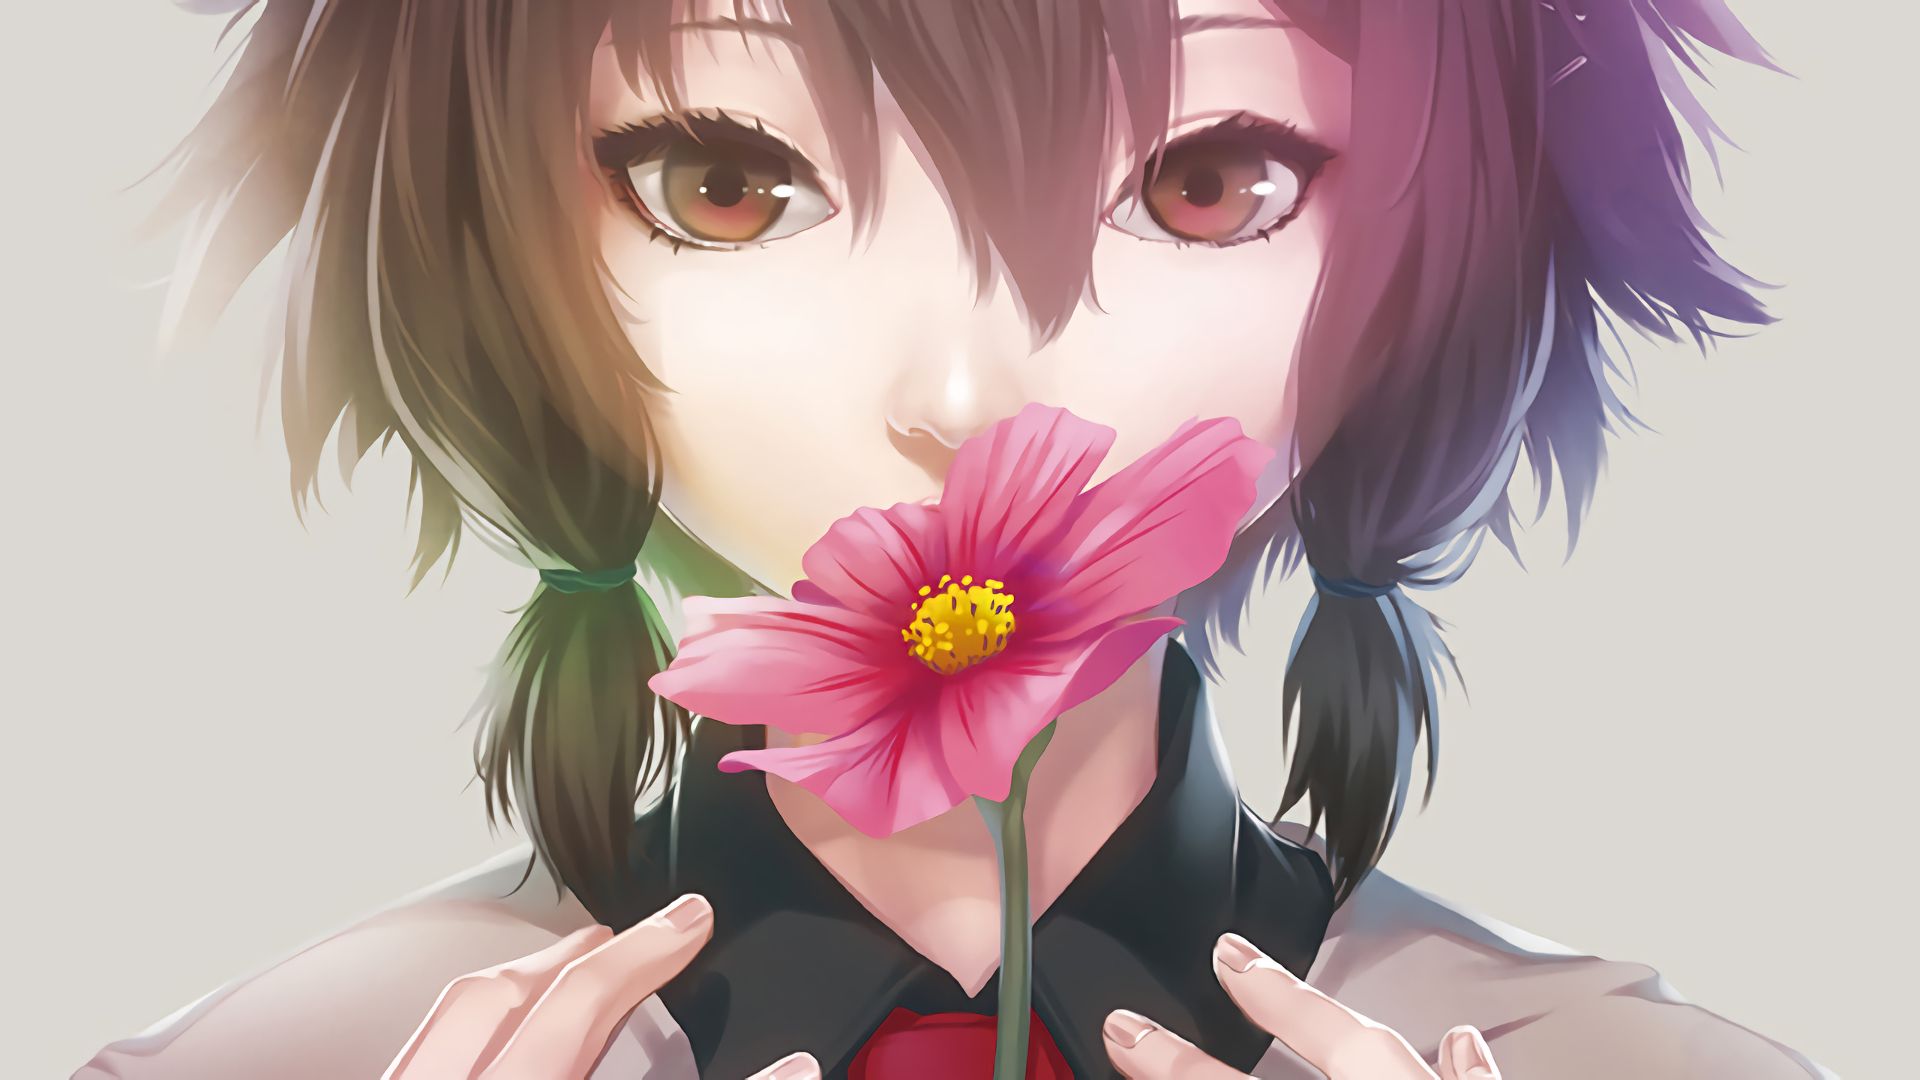 Anime girl looking at a pink flower HD Wallpaper